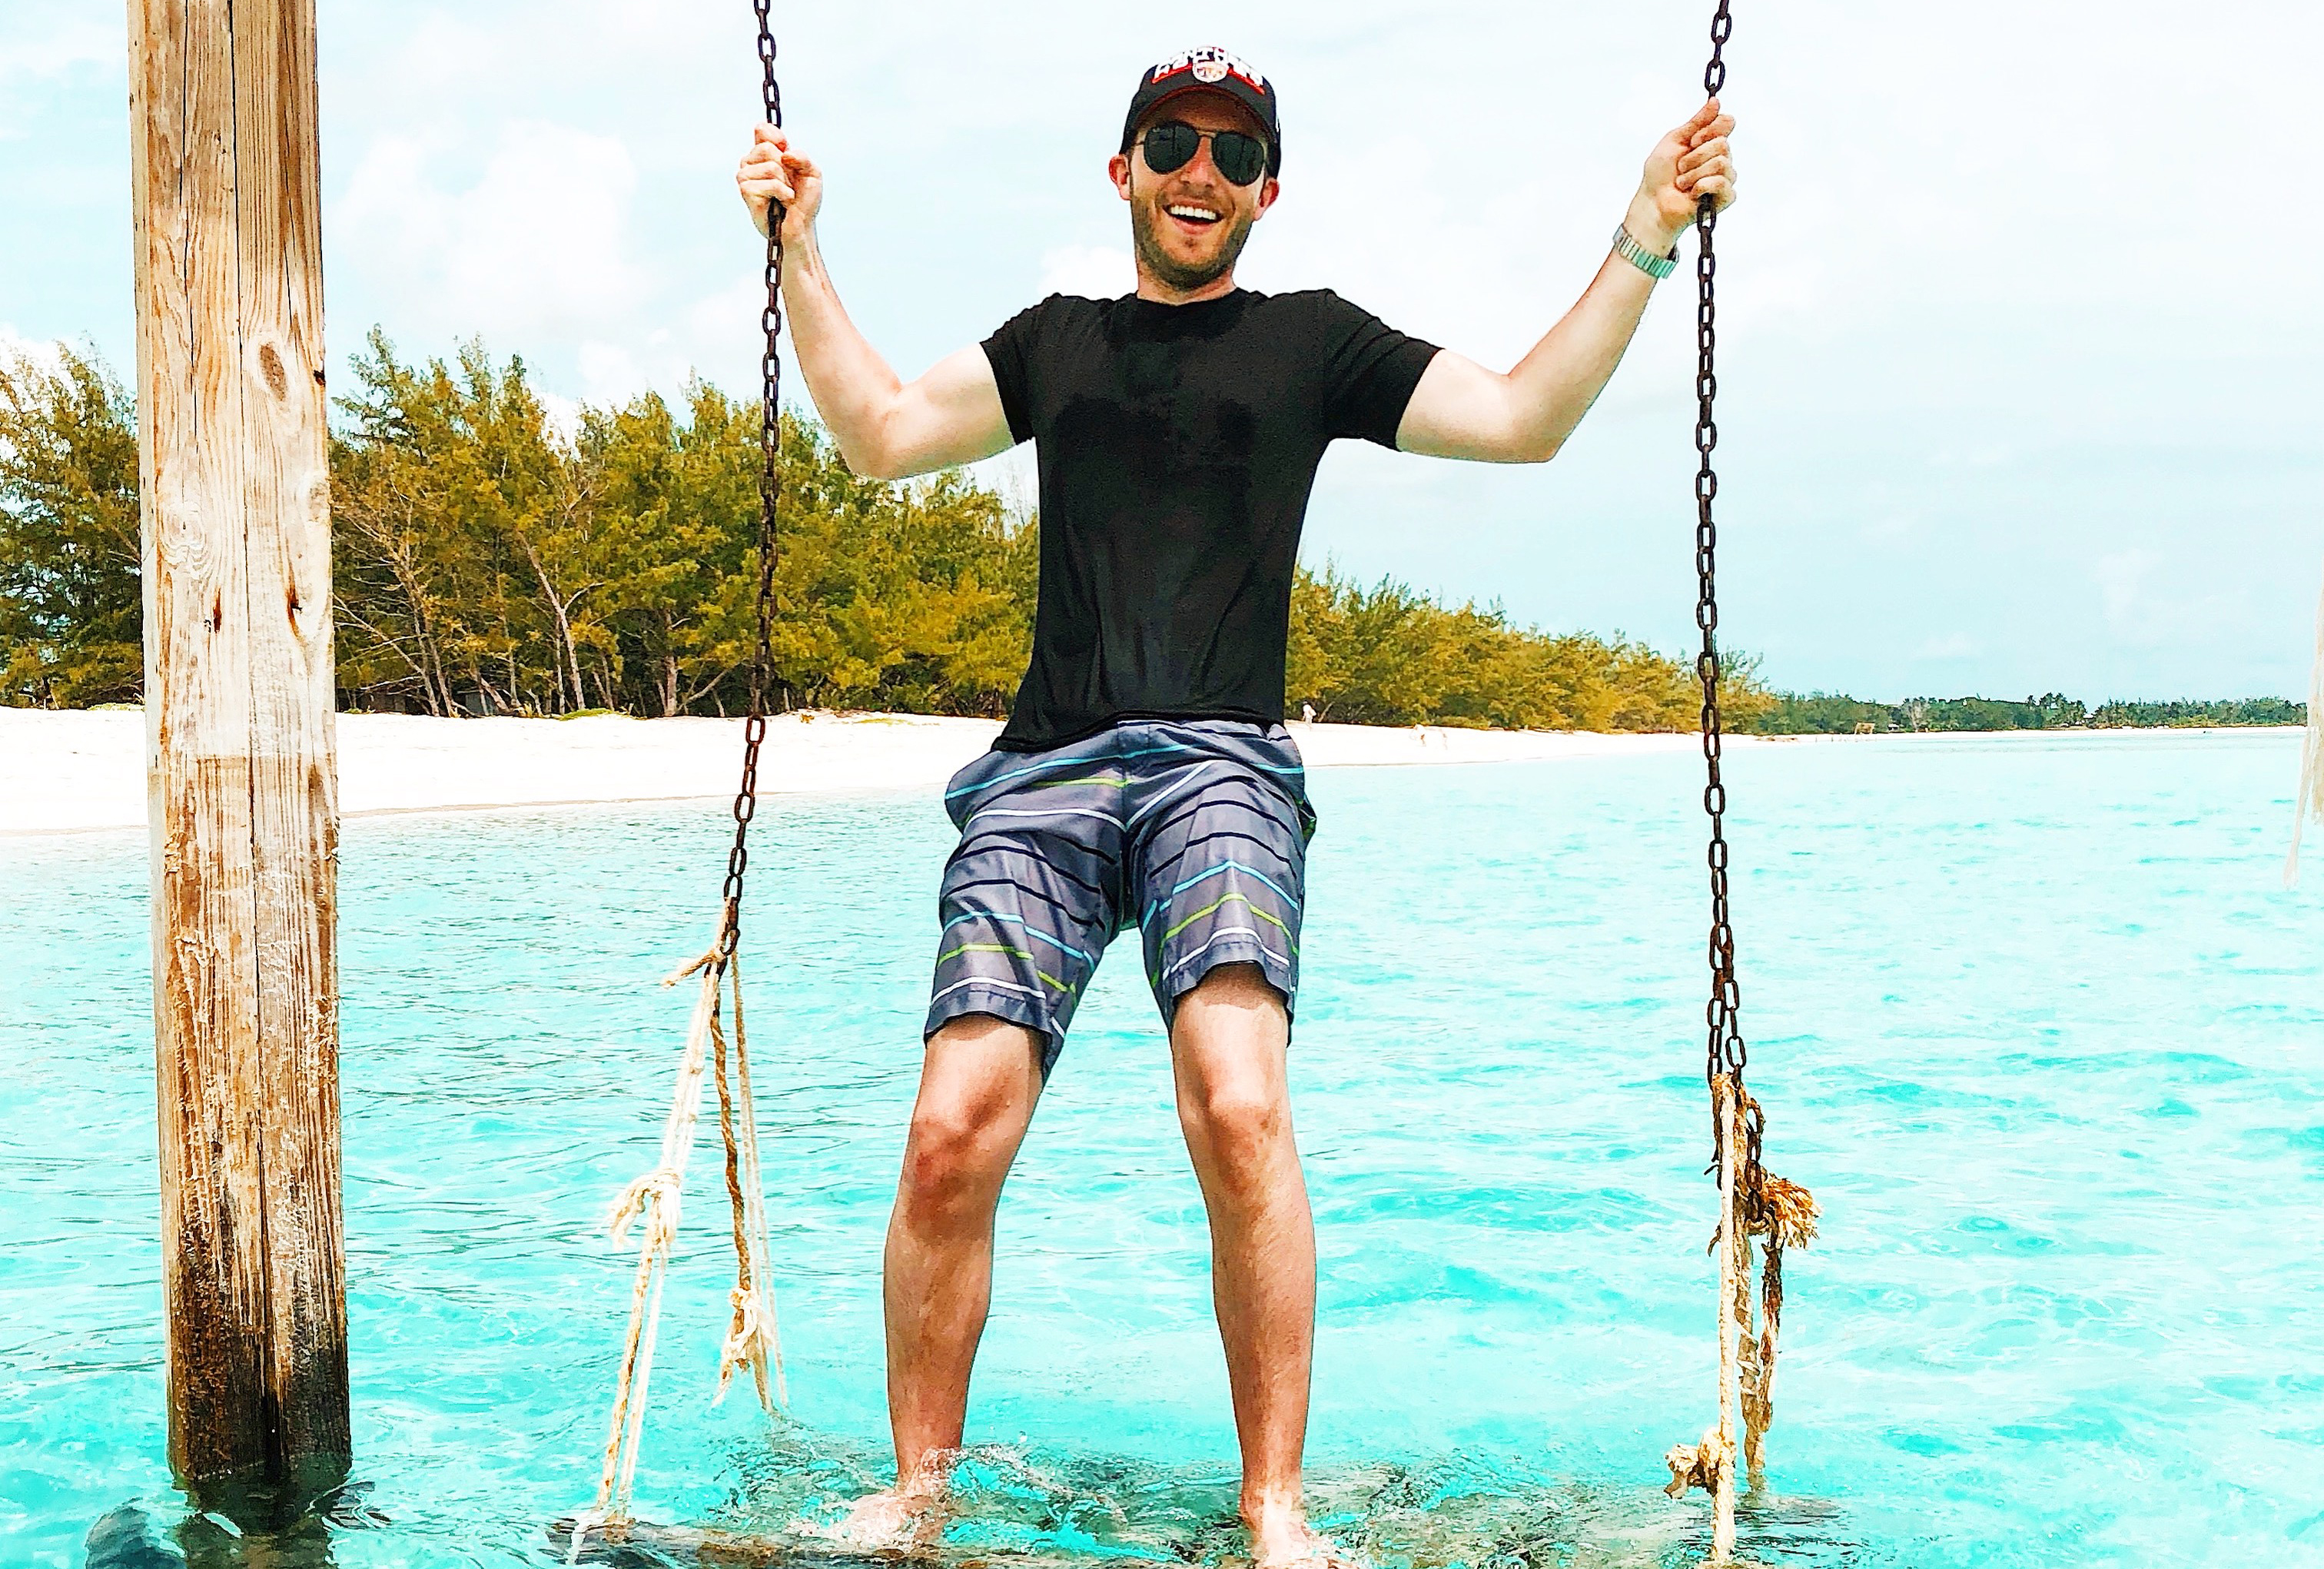 Nicolo Bates poses on a swing over the ocean